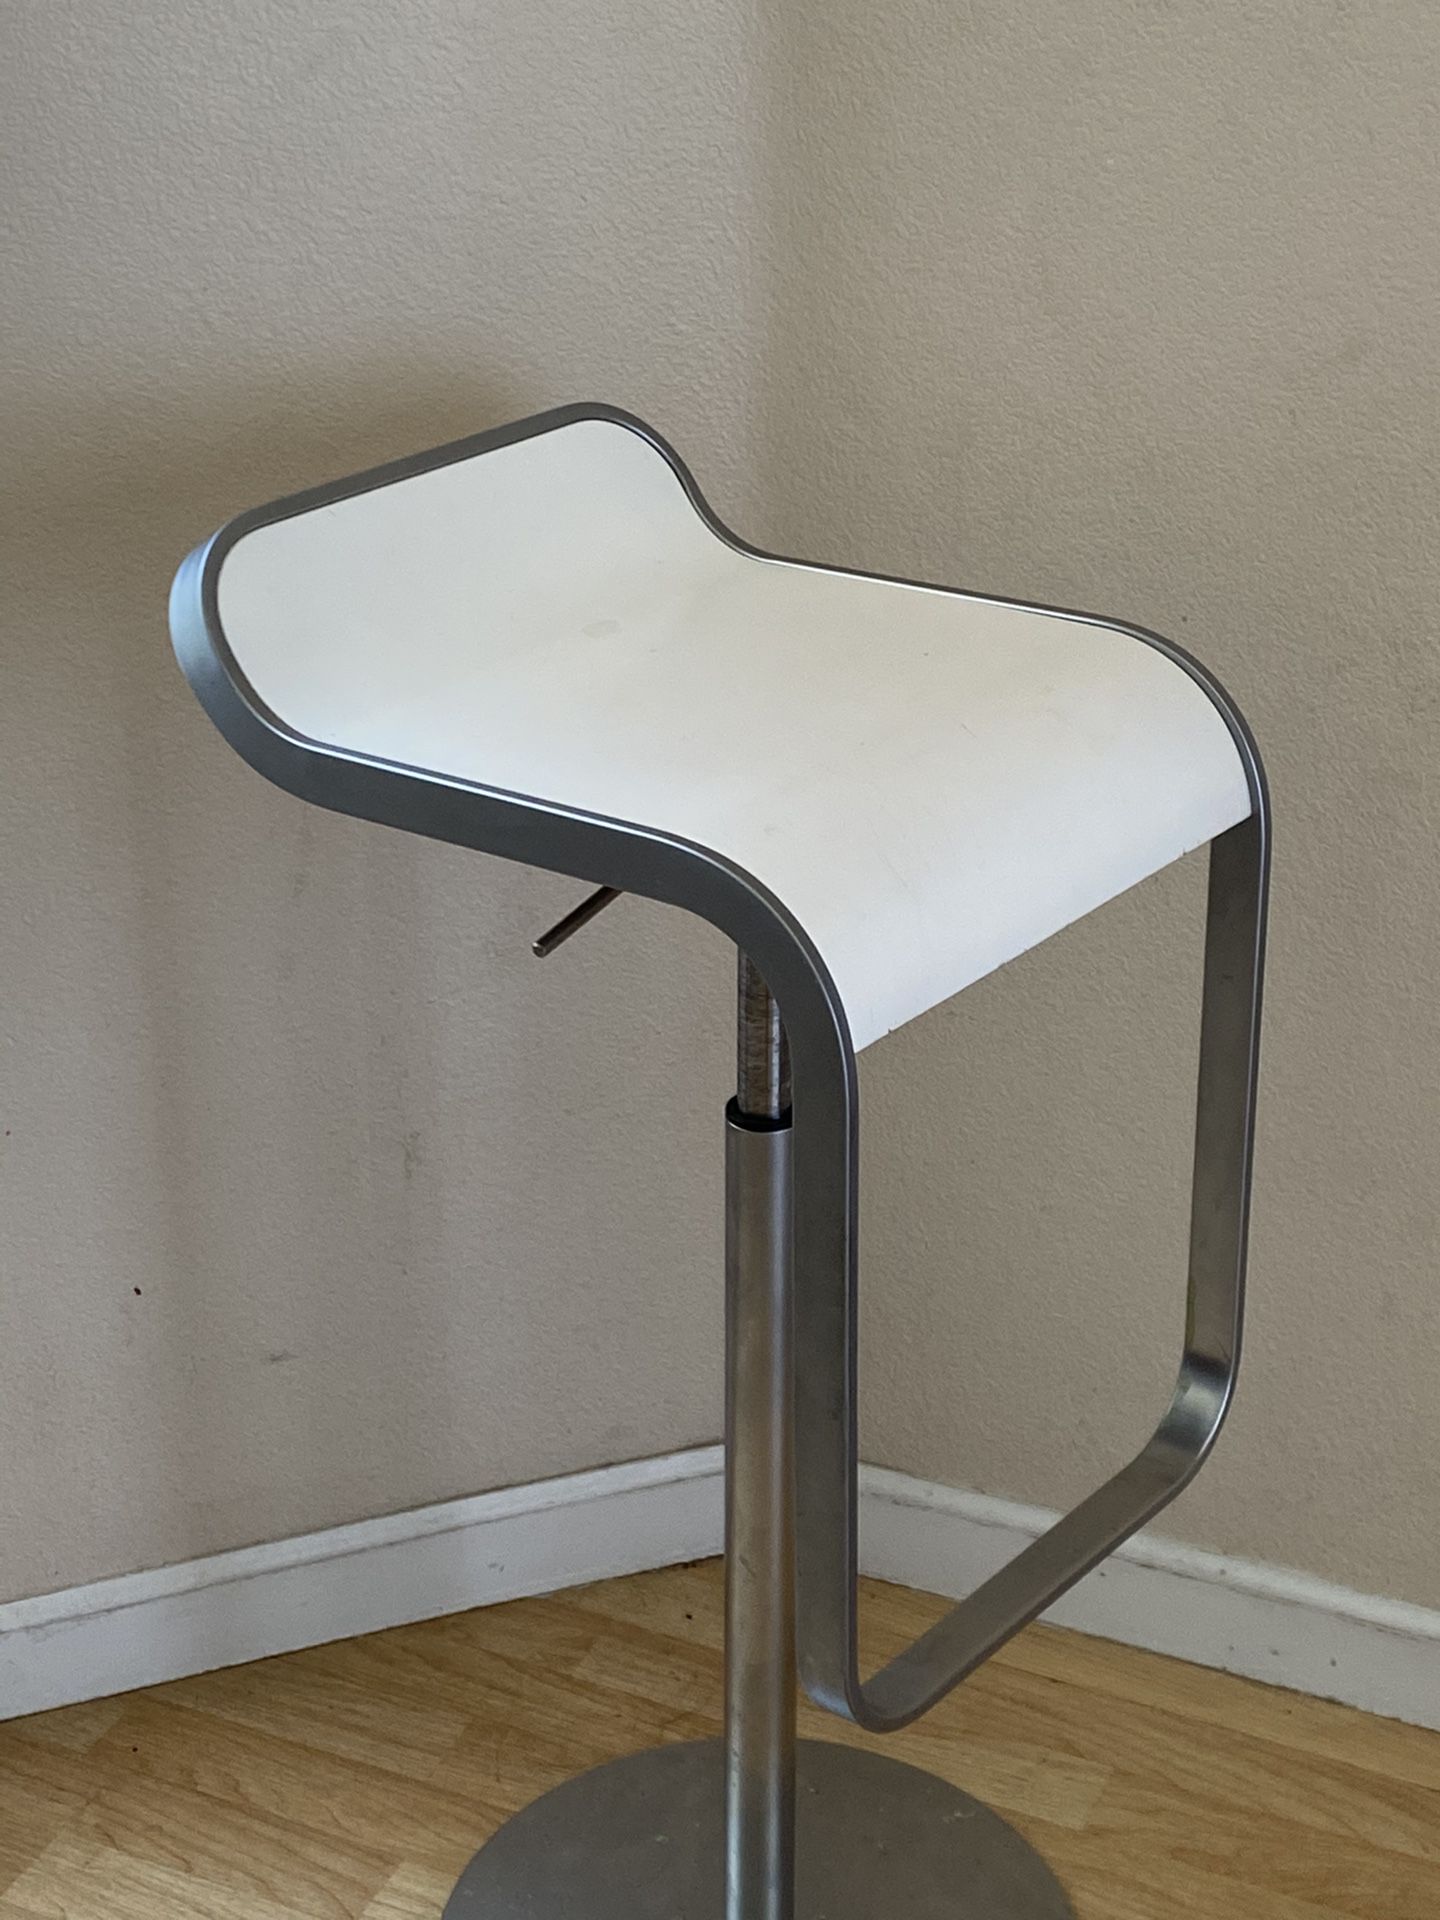 Three of these modern stools for the price of $99